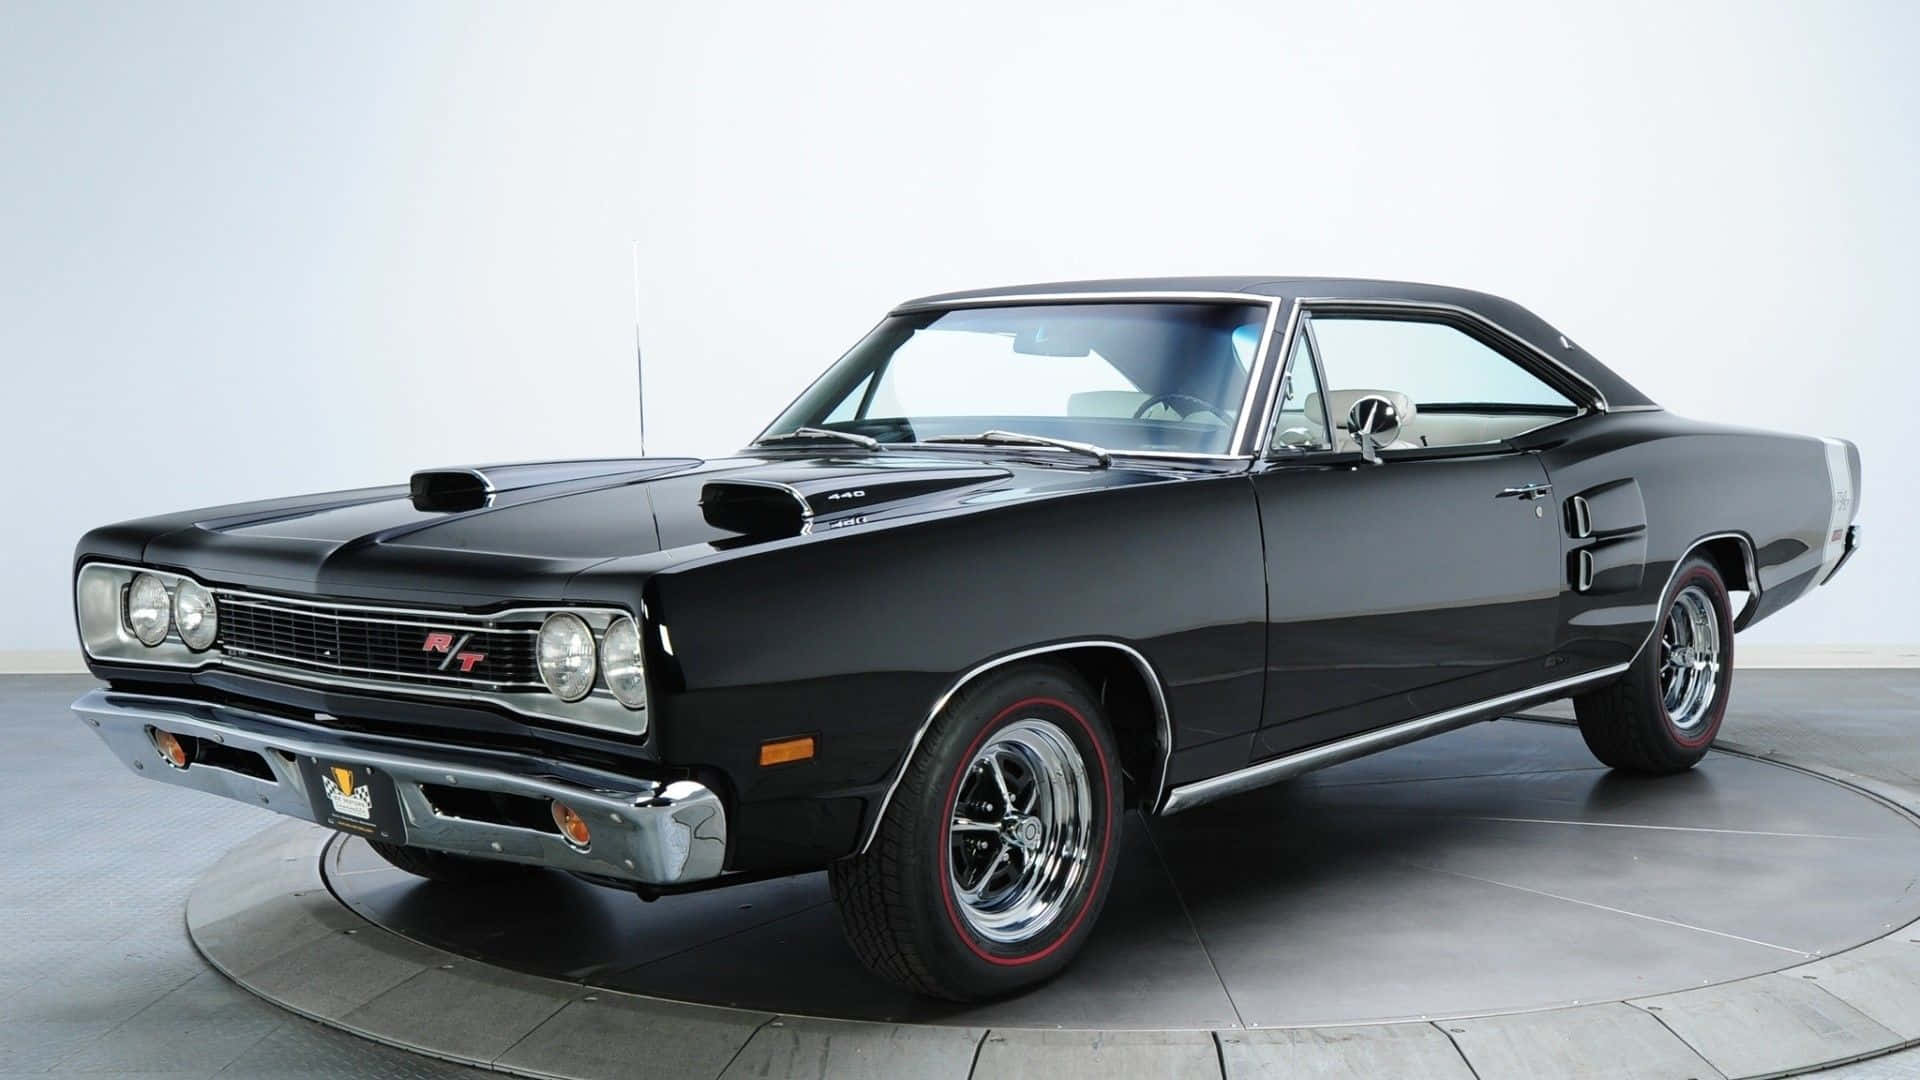 A Black Muscle Car Is Parked On A Circular Platform Wallpaper